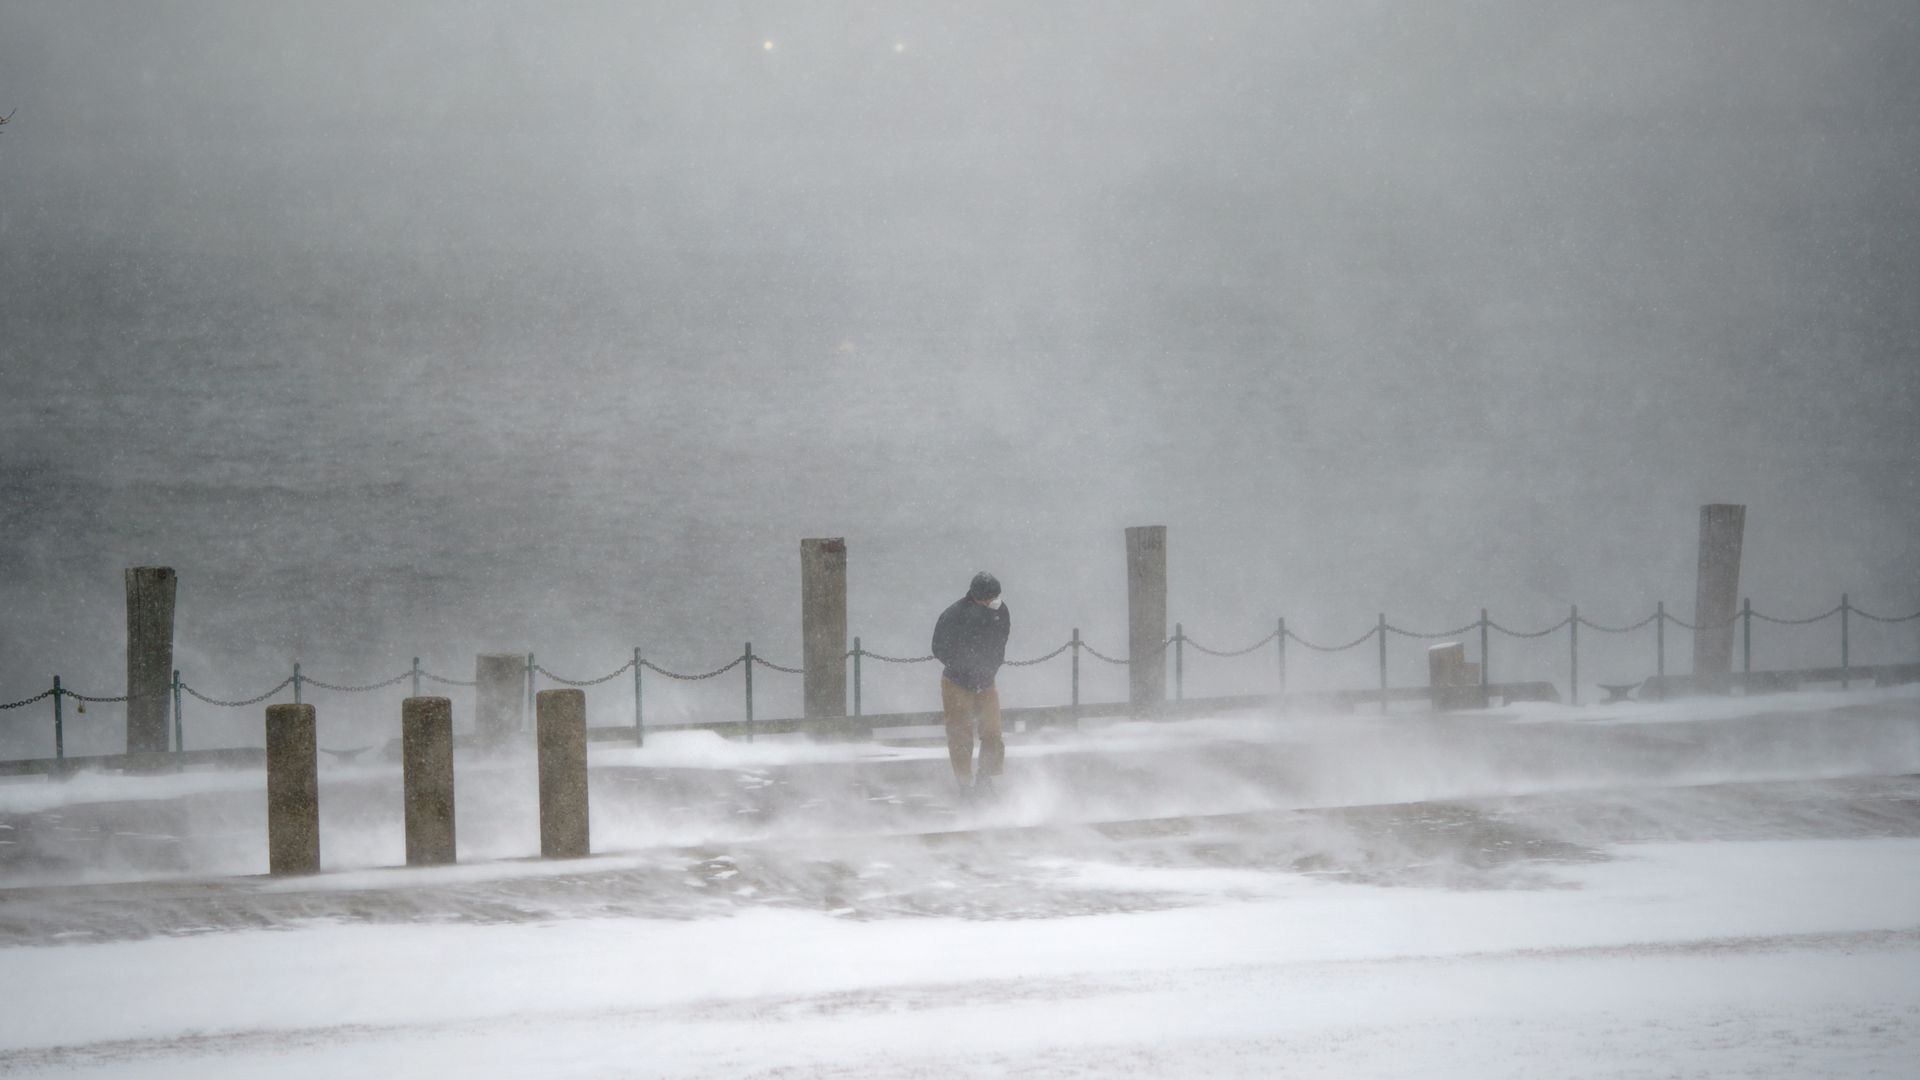 A pedestrian walks through a gust of wind along the waterfront in India Point Park in Providence, R.I., Saturday, Jan. 29, 2022.